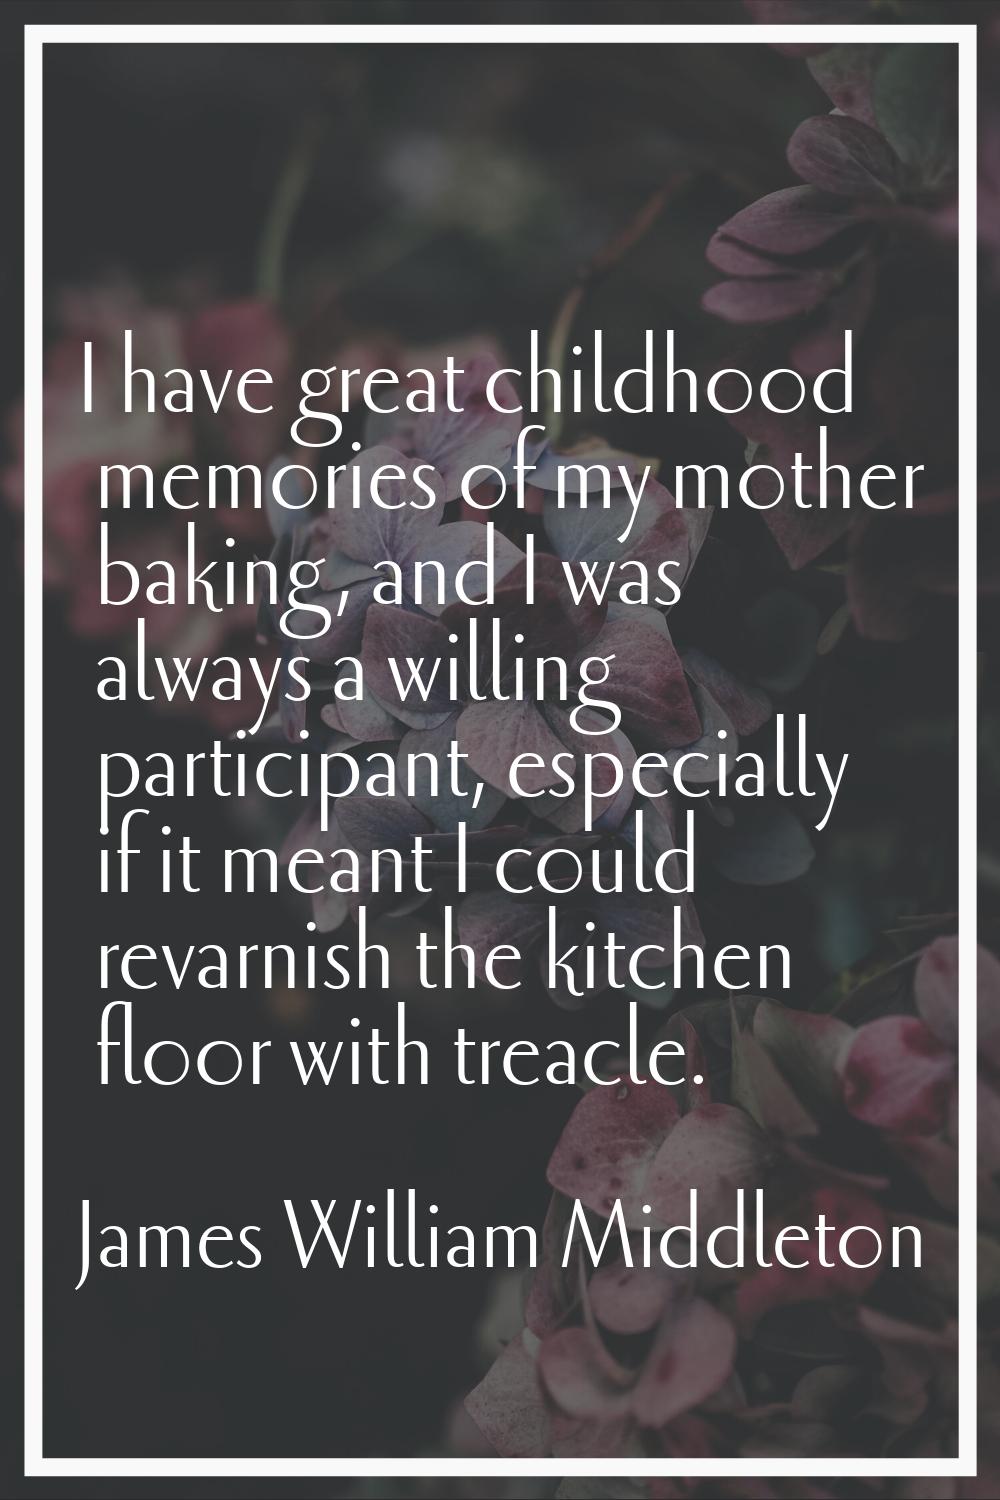 I have great childhood memories of my mother baking, and I was always a willing participant, especi